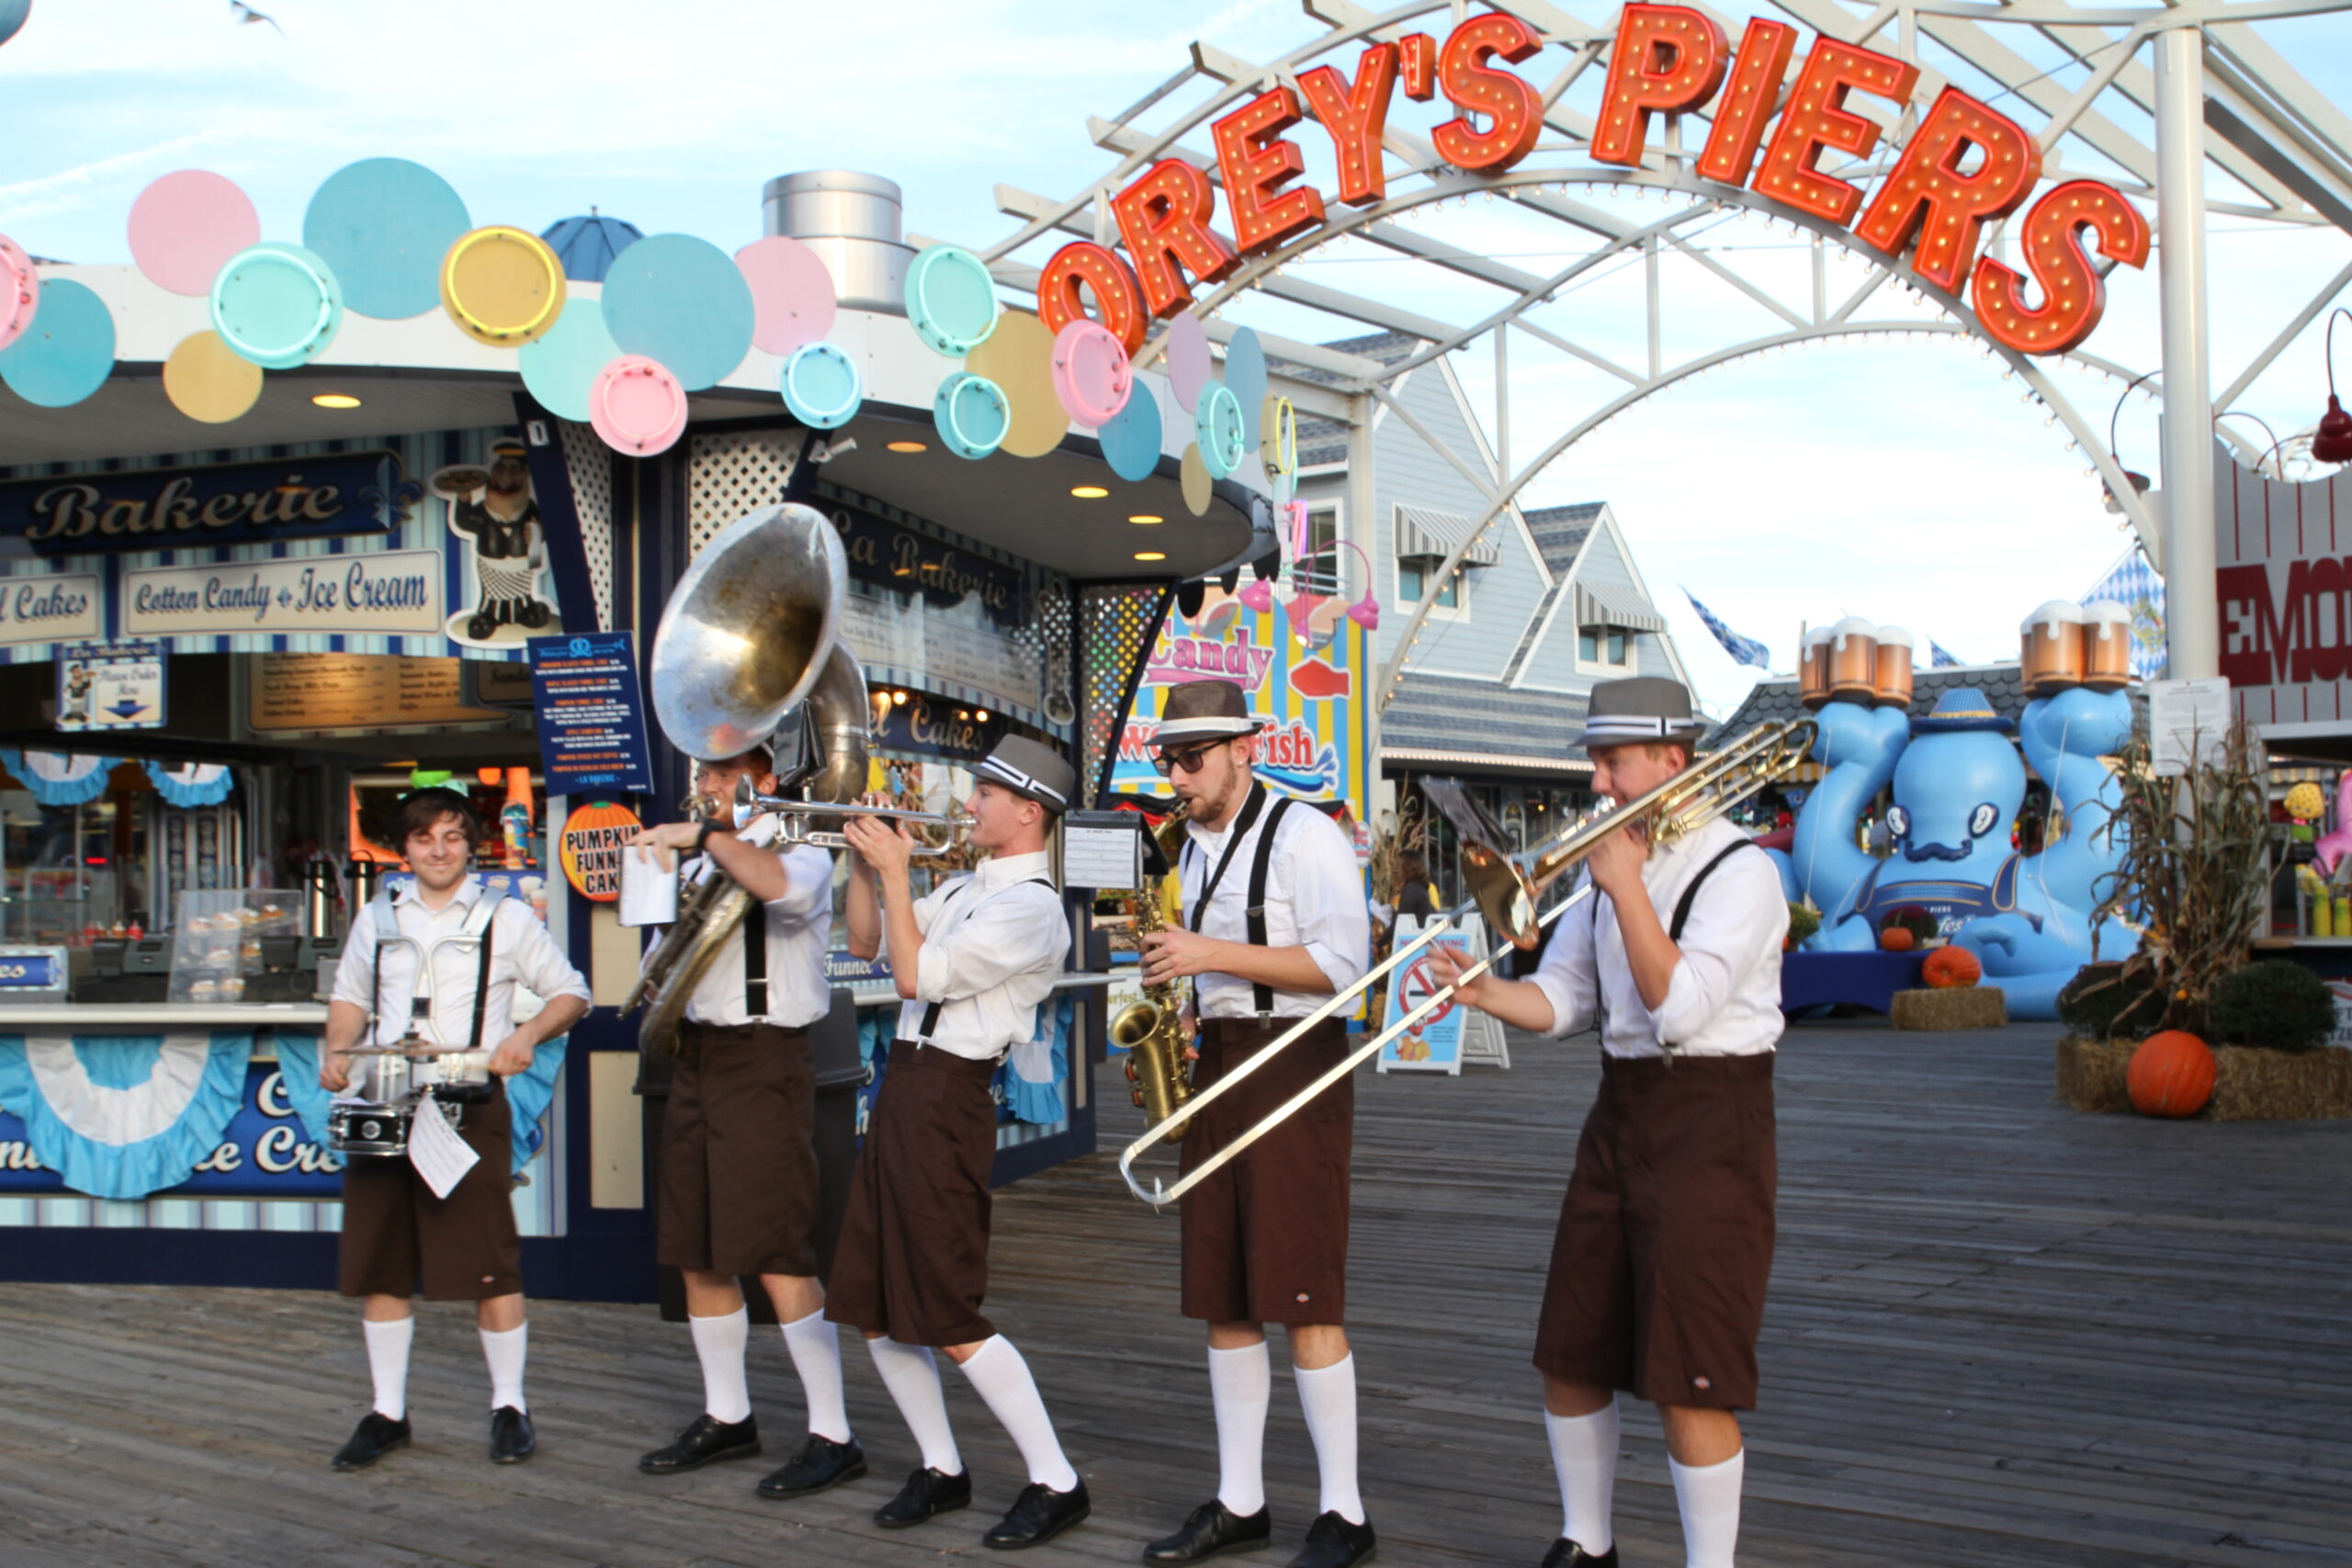 Oktoberfest returns to Morey’s Piers over four weekends « Amusement Today